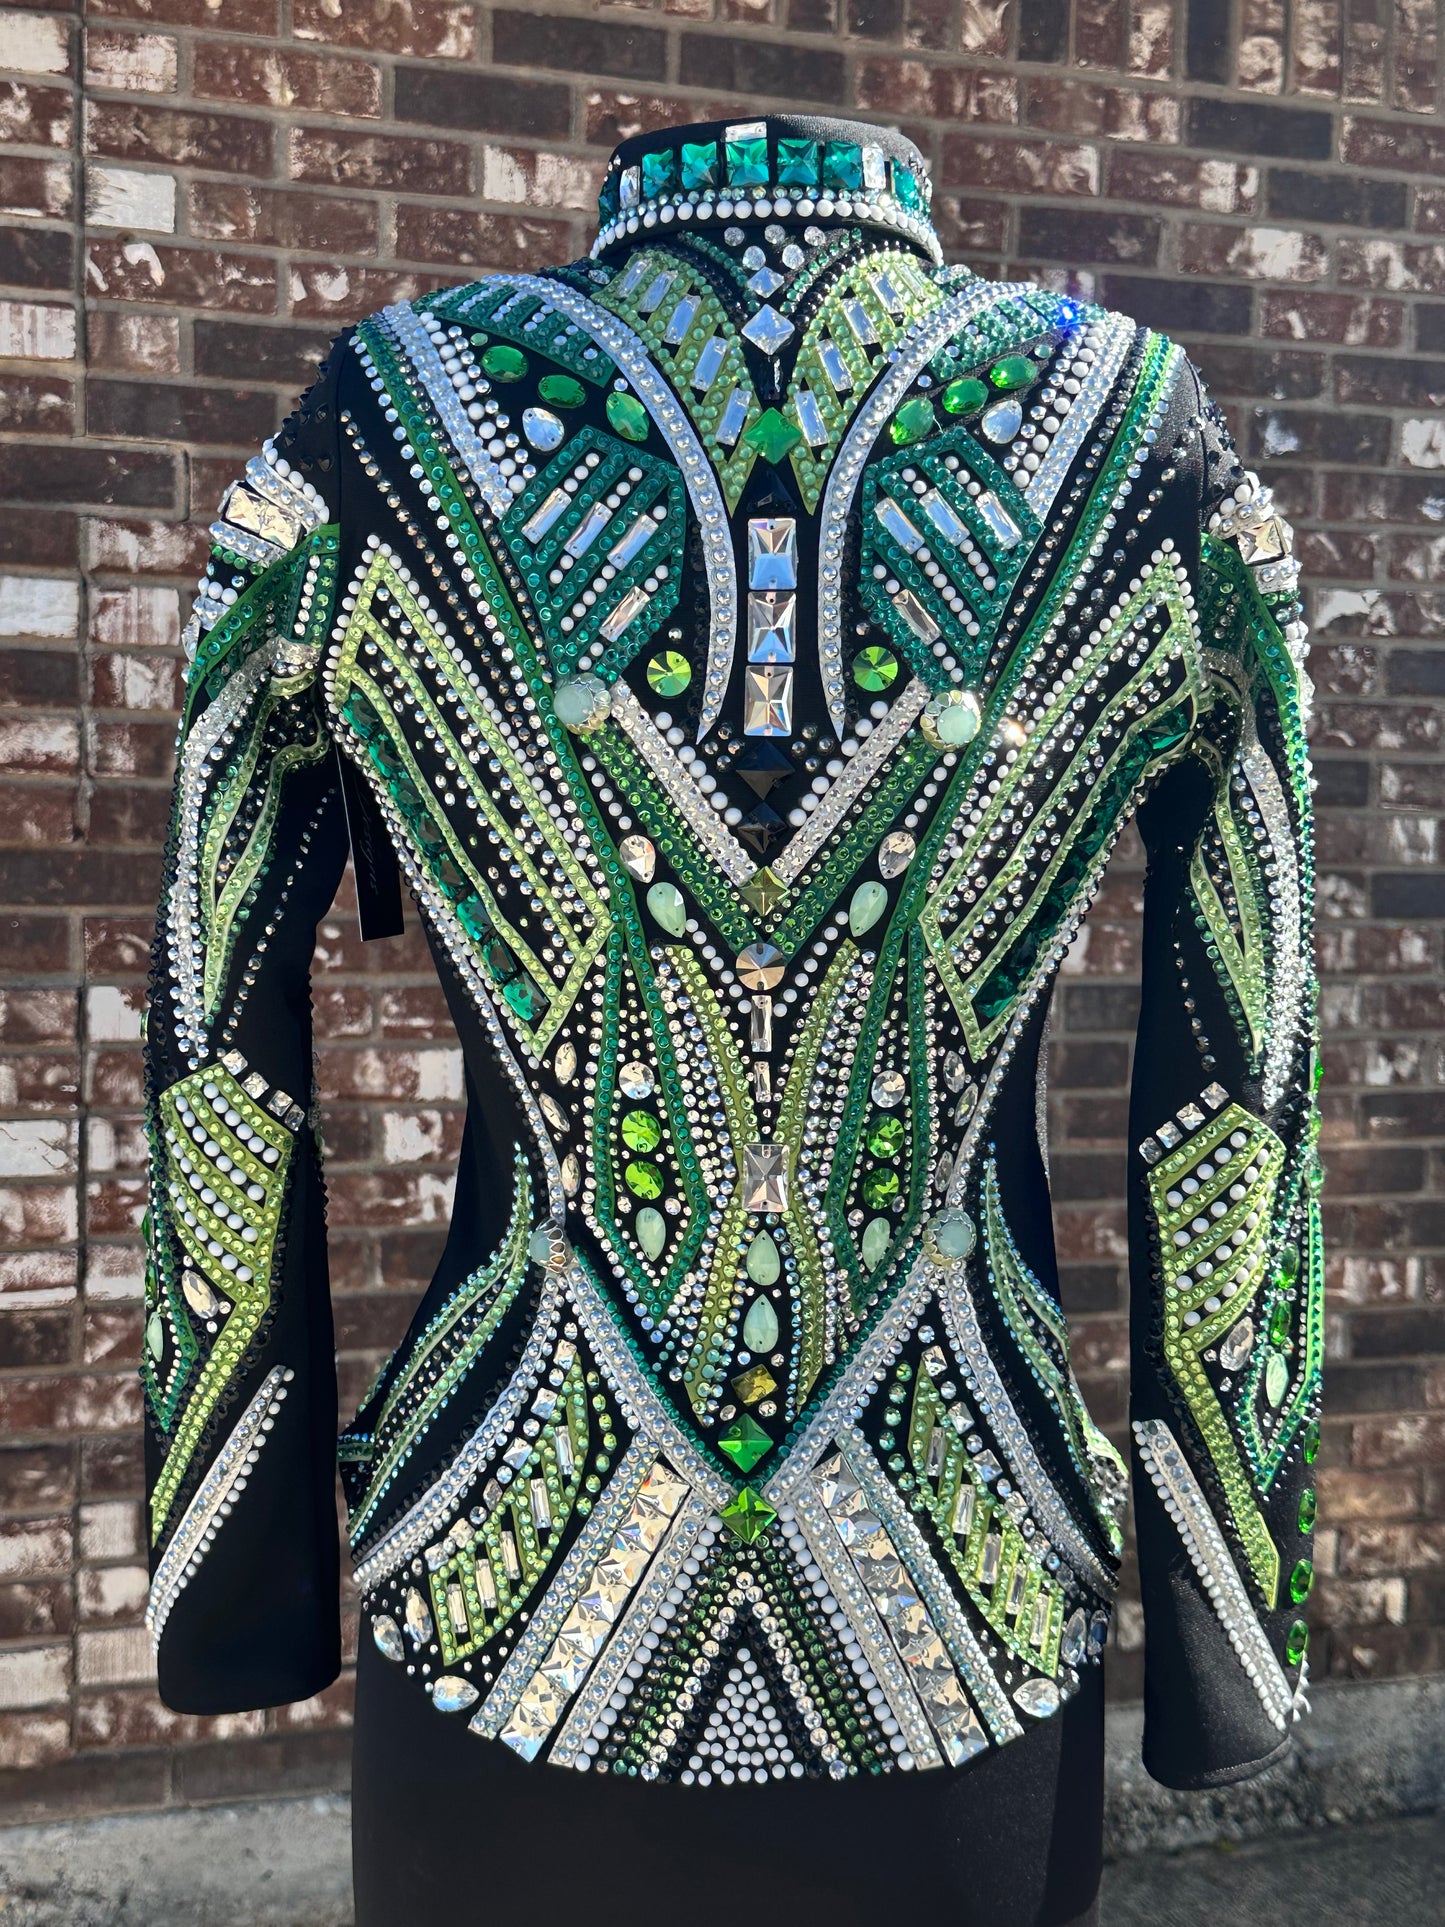 Small Showmanship Jacket black base with multiple shades of green, white and silver